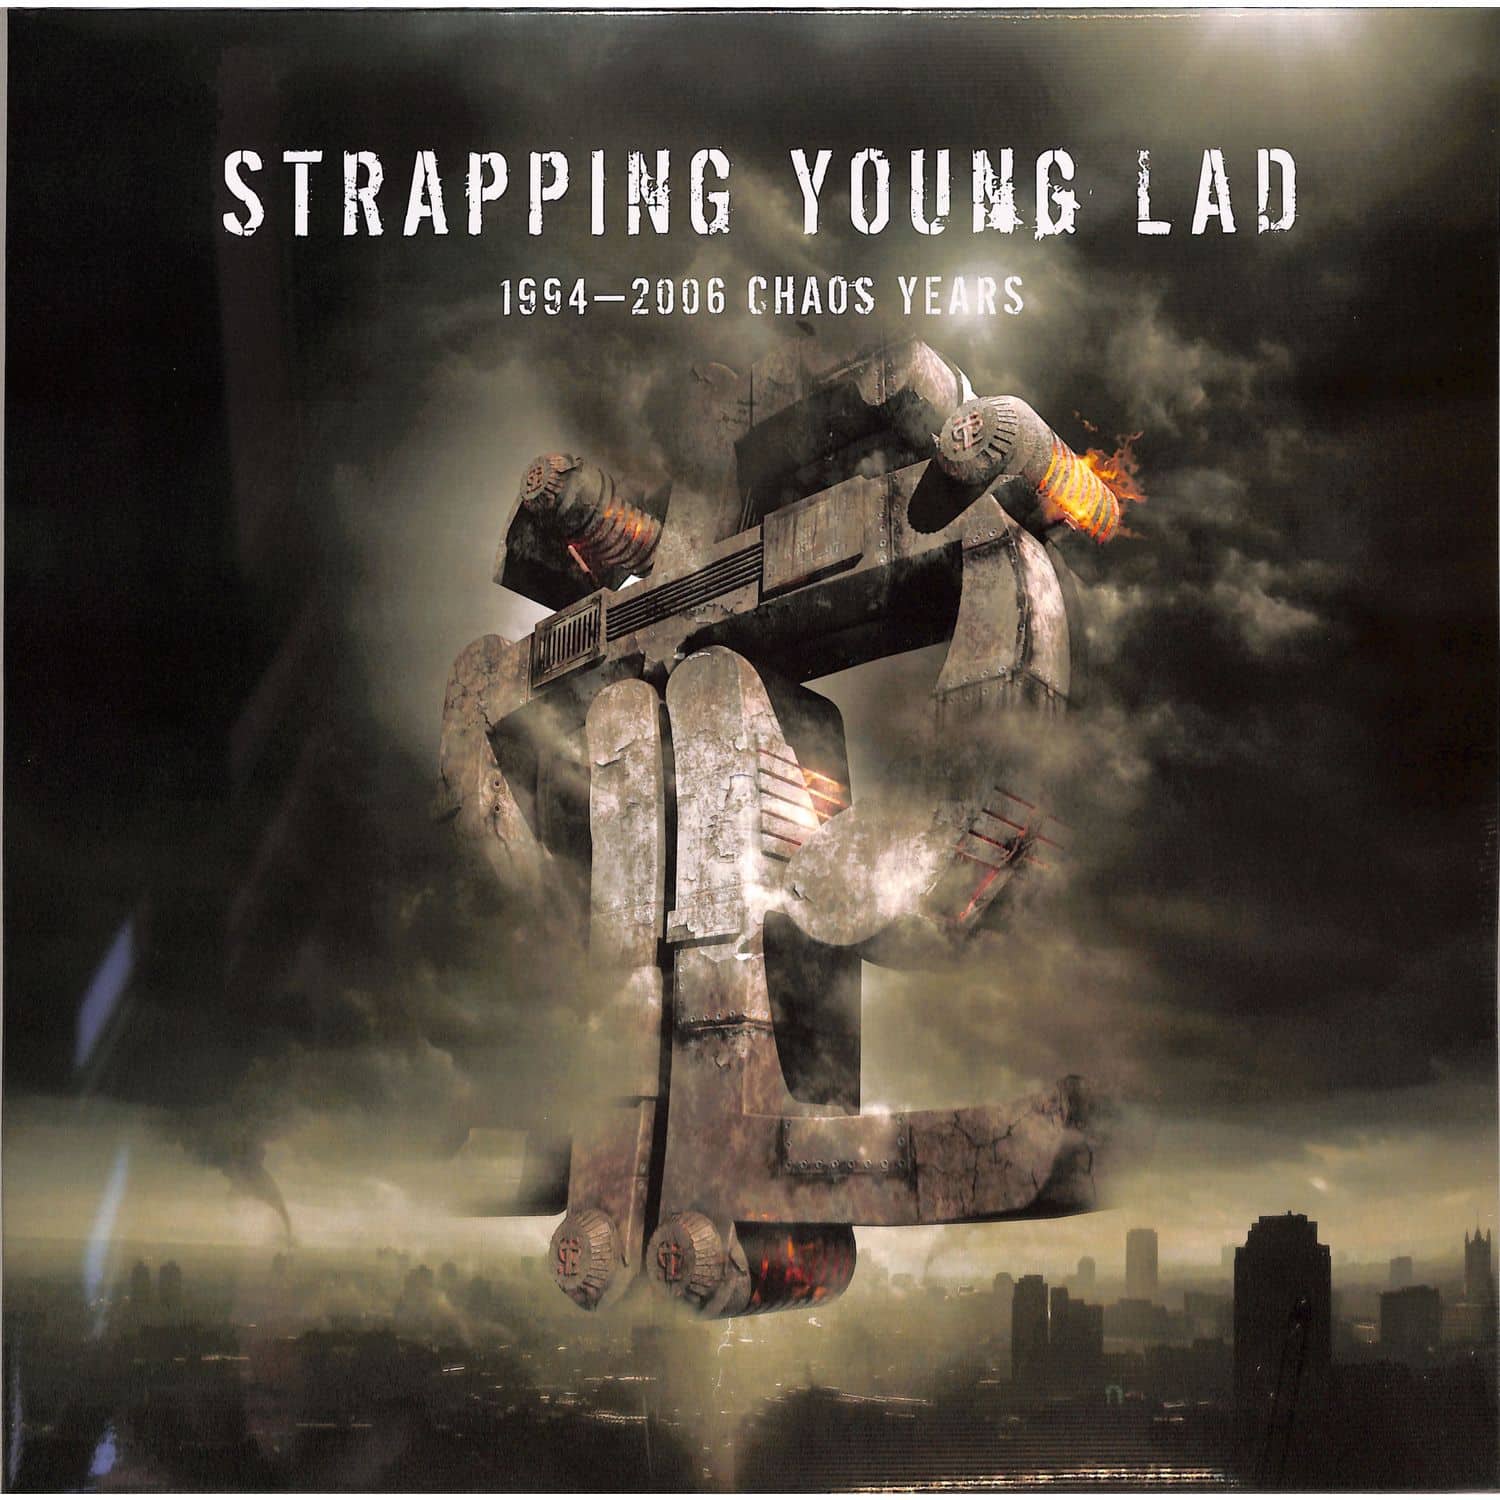 Strapping Young Lad - 1994-2006 CHAOS YEARS 